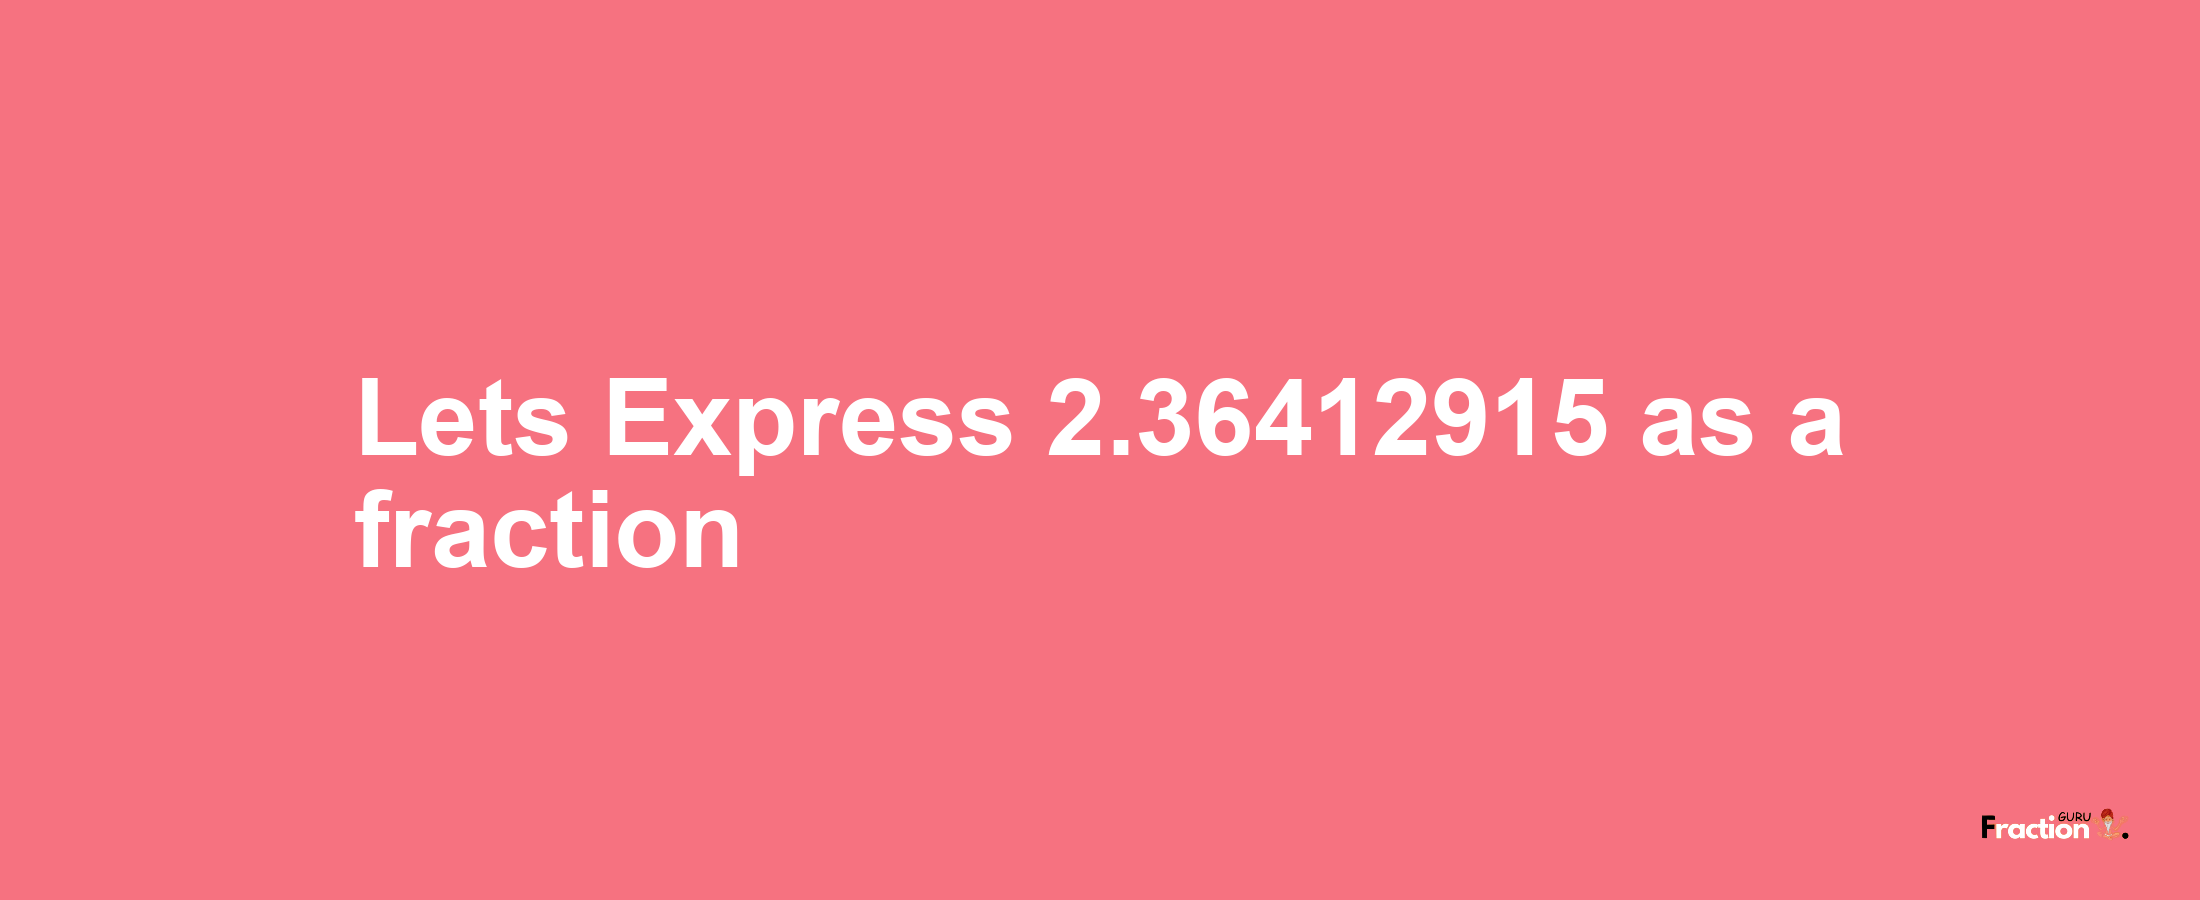 Lets Express 2.36412915 as afraction